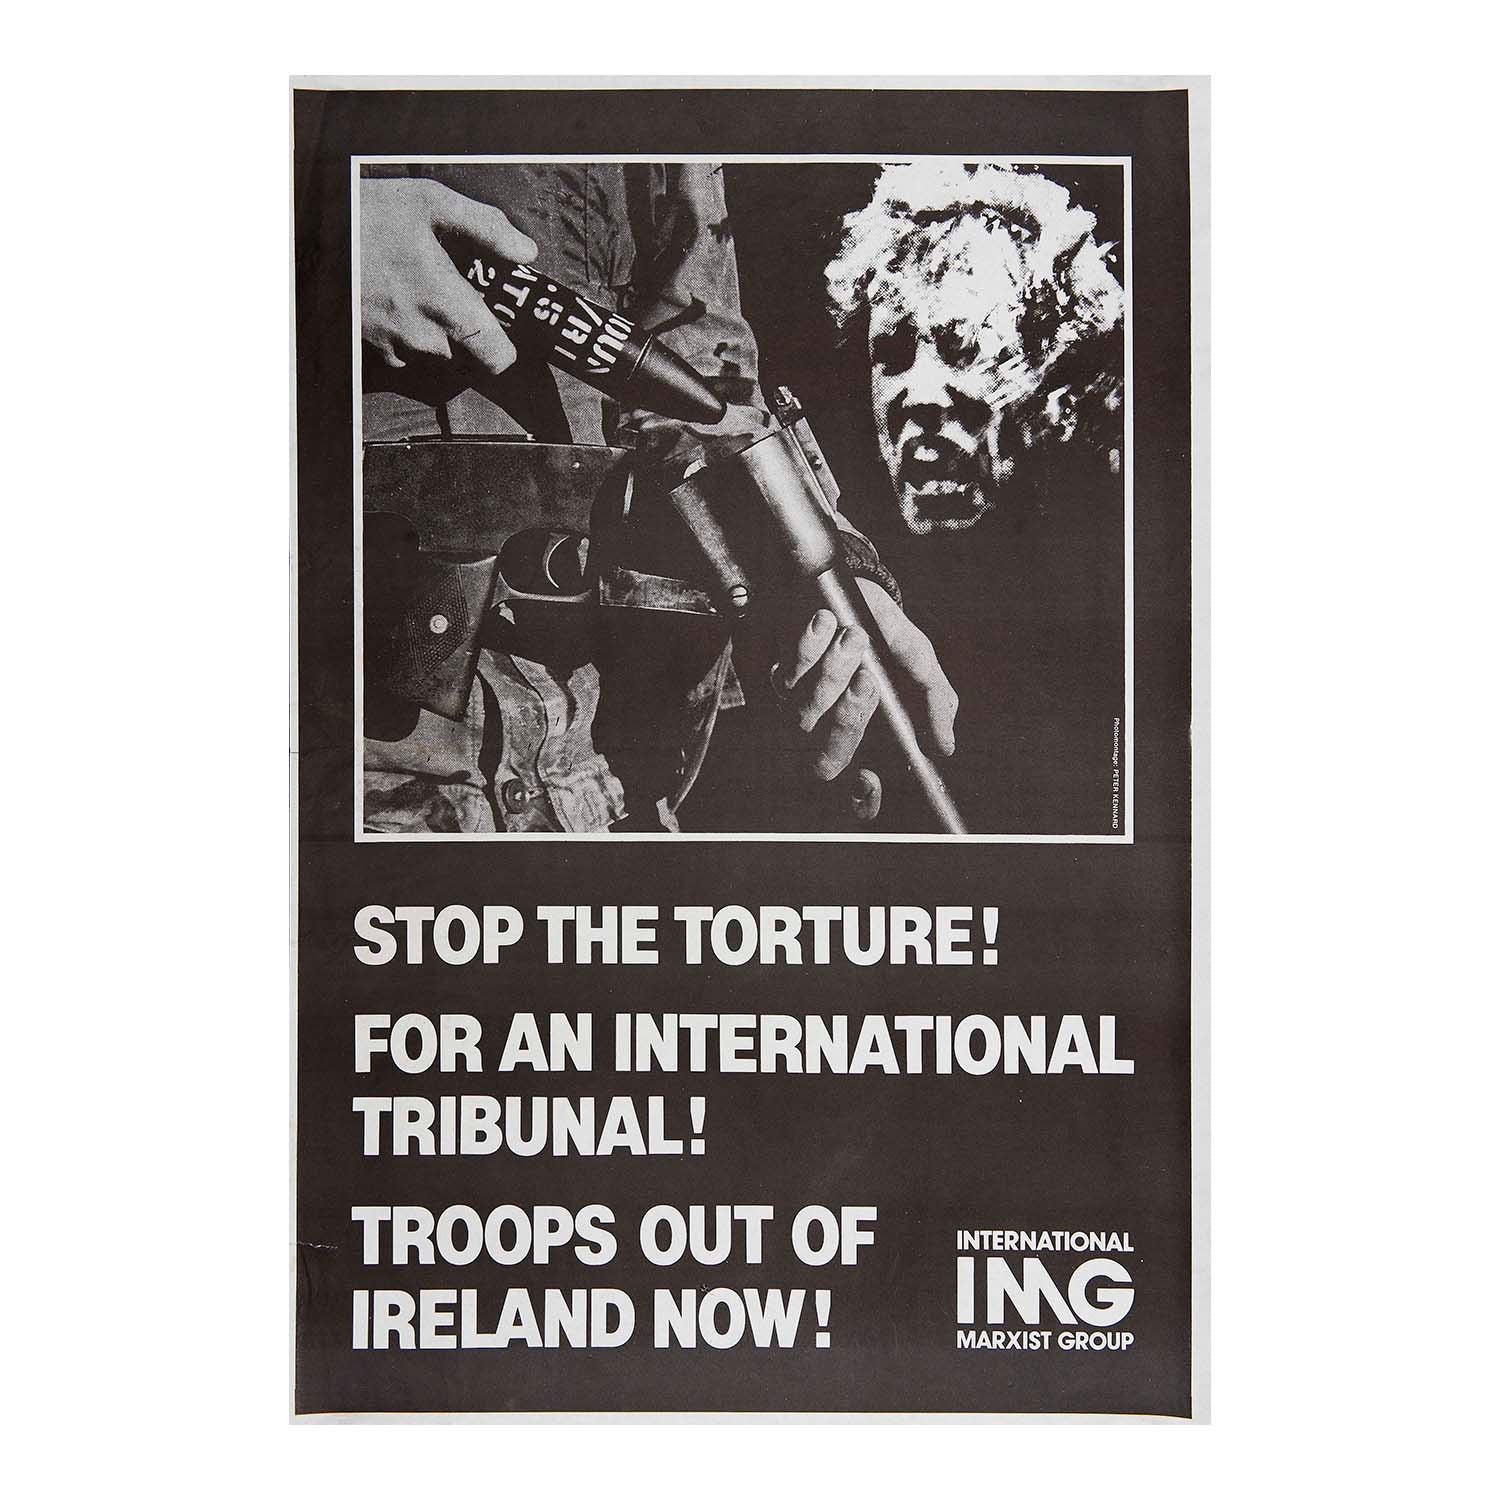 original protest poster Troops out of Ireland now!, published by the International Marxist Group, c.1974. Photomontage by Peter Kennard, created to mark the Bloody Sunday massacre 1972